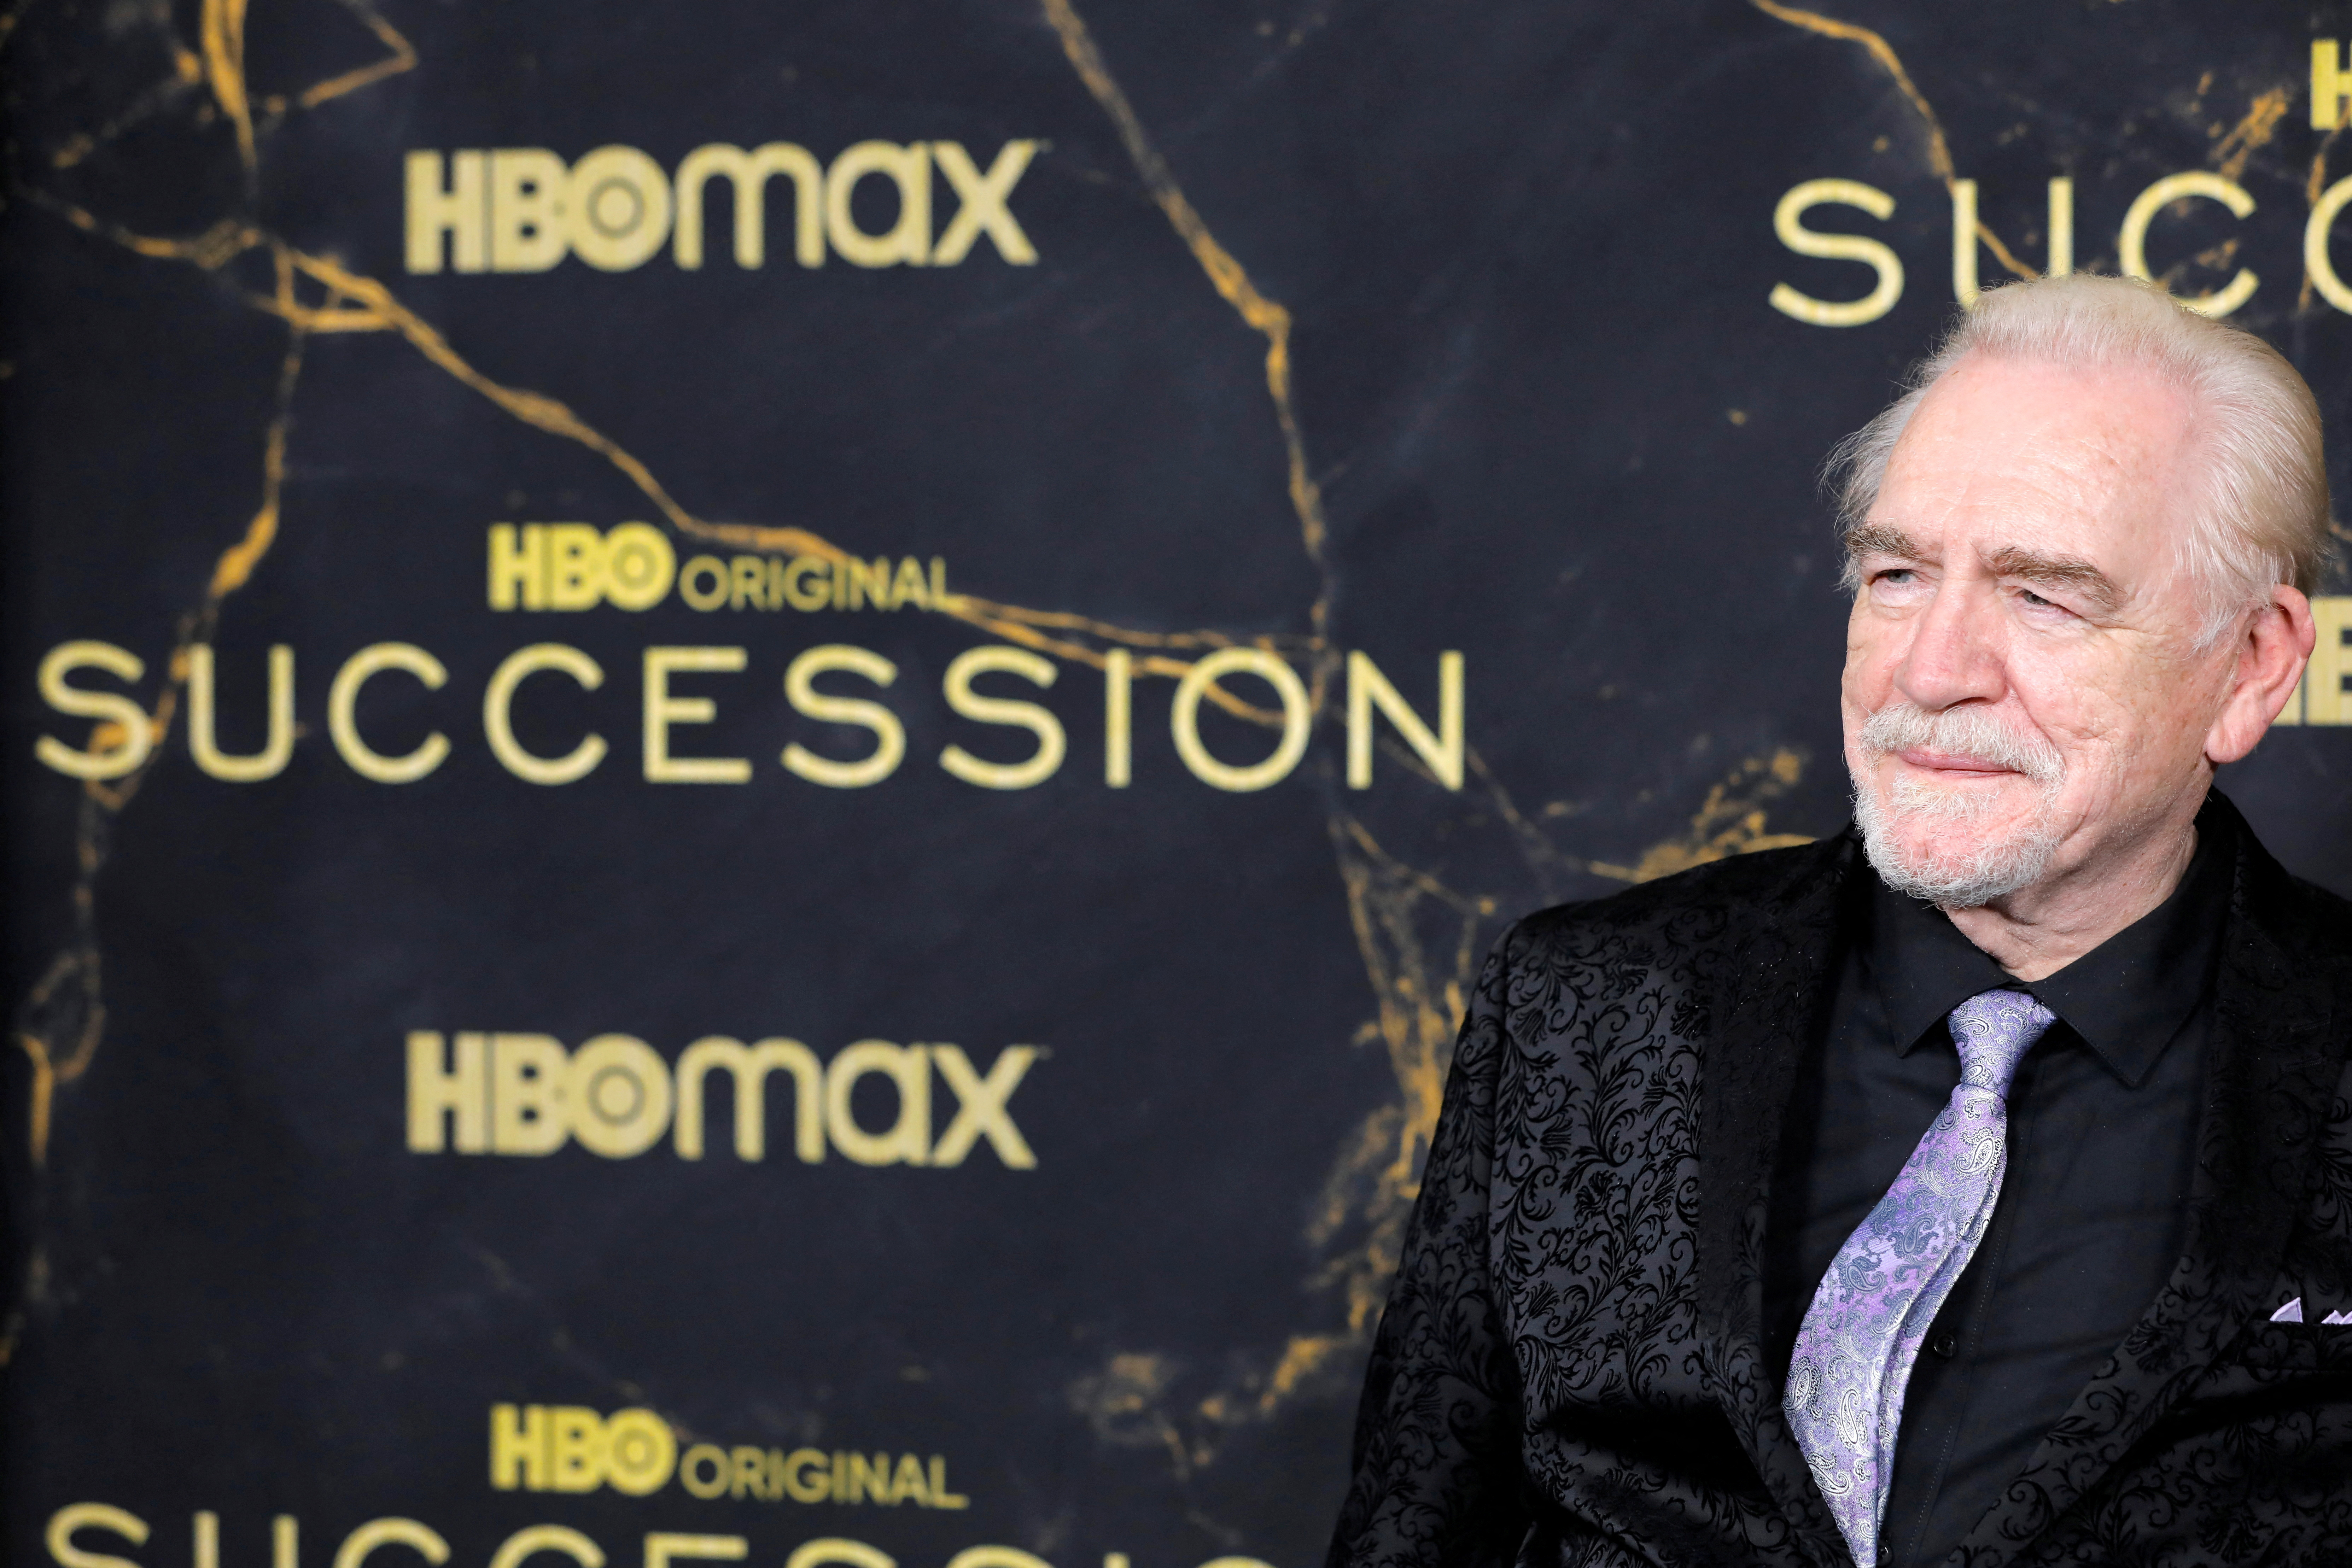 Brian Cox poses while attending the premiere of the third season of "Succession" in Manhattan, New York